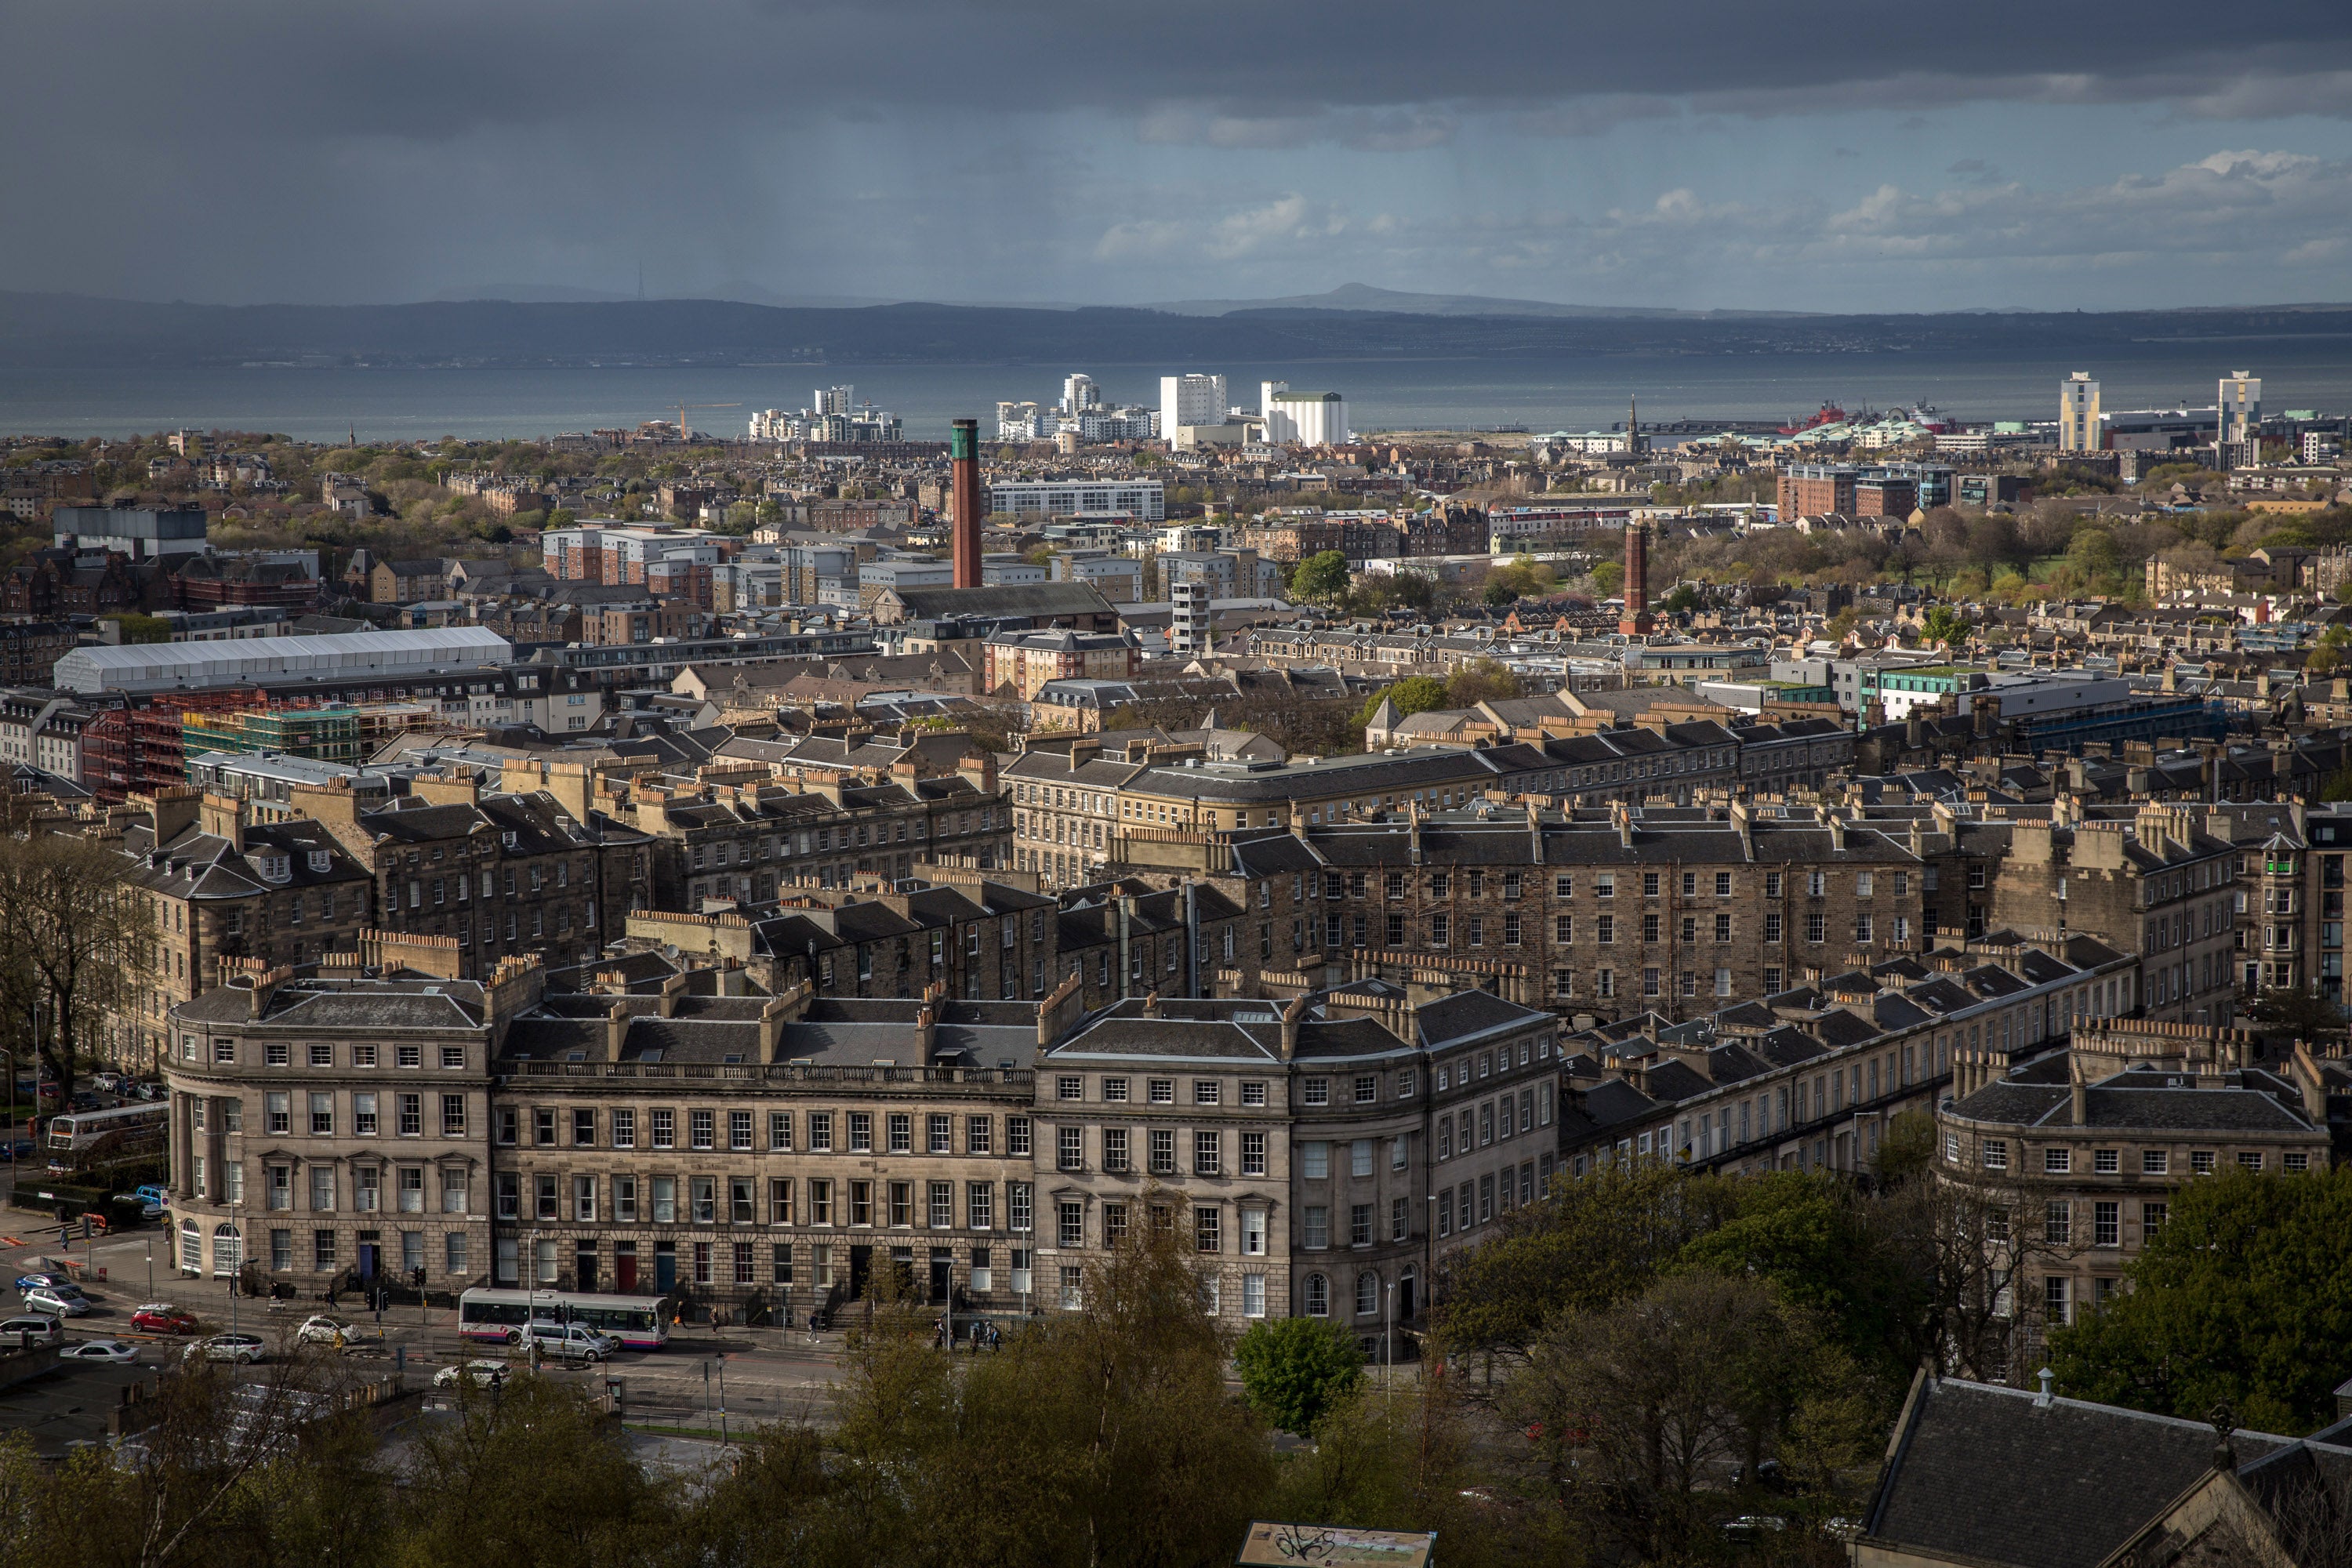 The sun sets over the New Town area of Edinburgh on May 3, 2016 in Edinburgh, Scotland. A 22-year-old man has been found guilty of possessing weapons at multiple locations in the city.